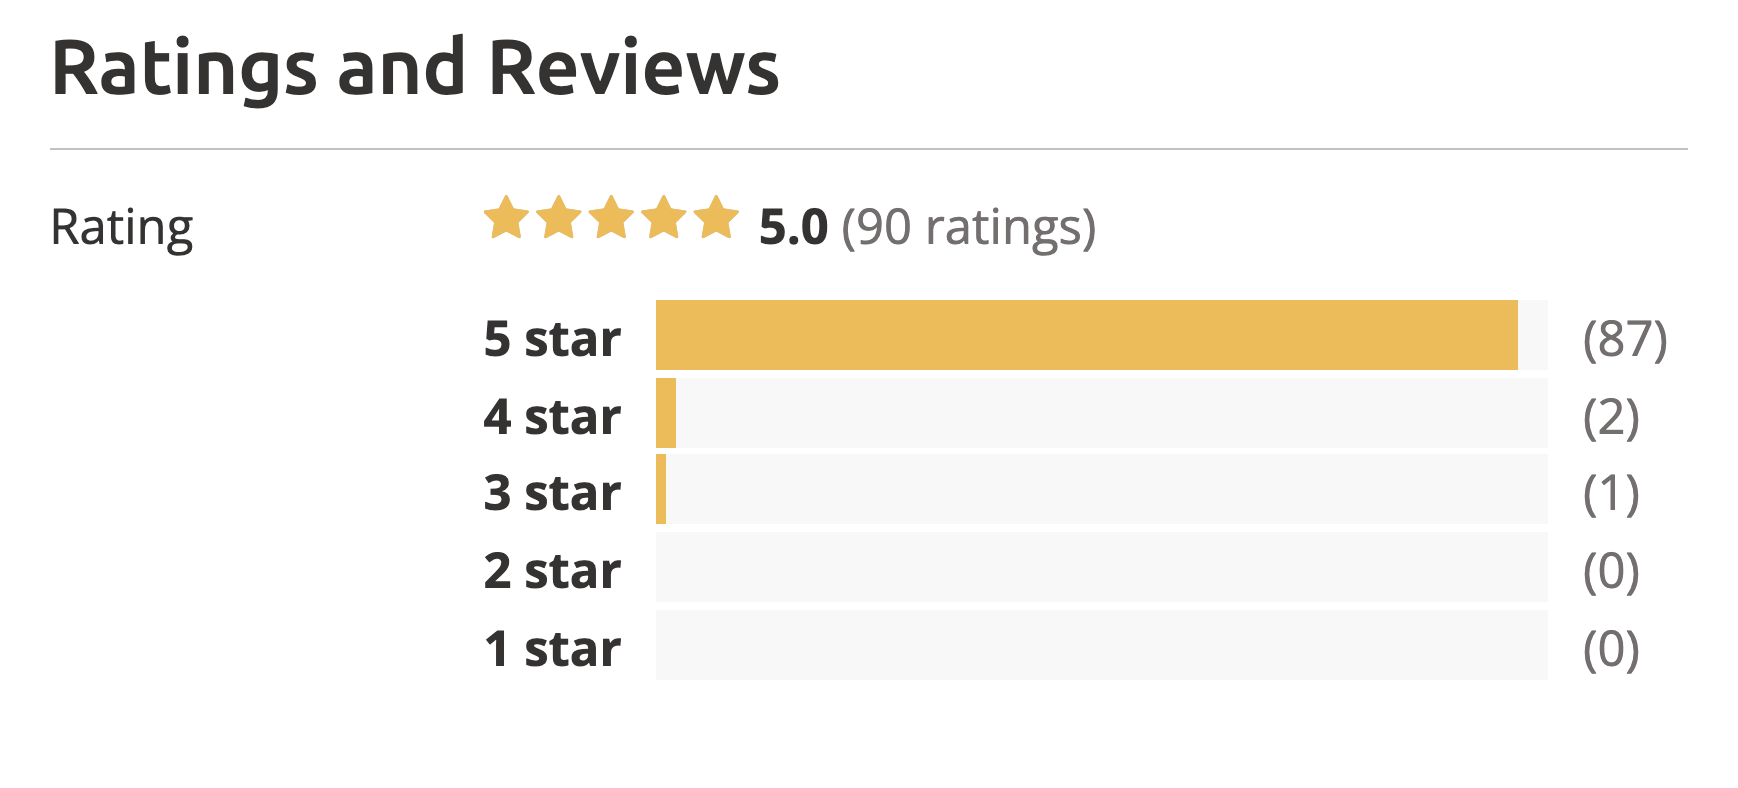 5 out of 5 stars, 90 reviews